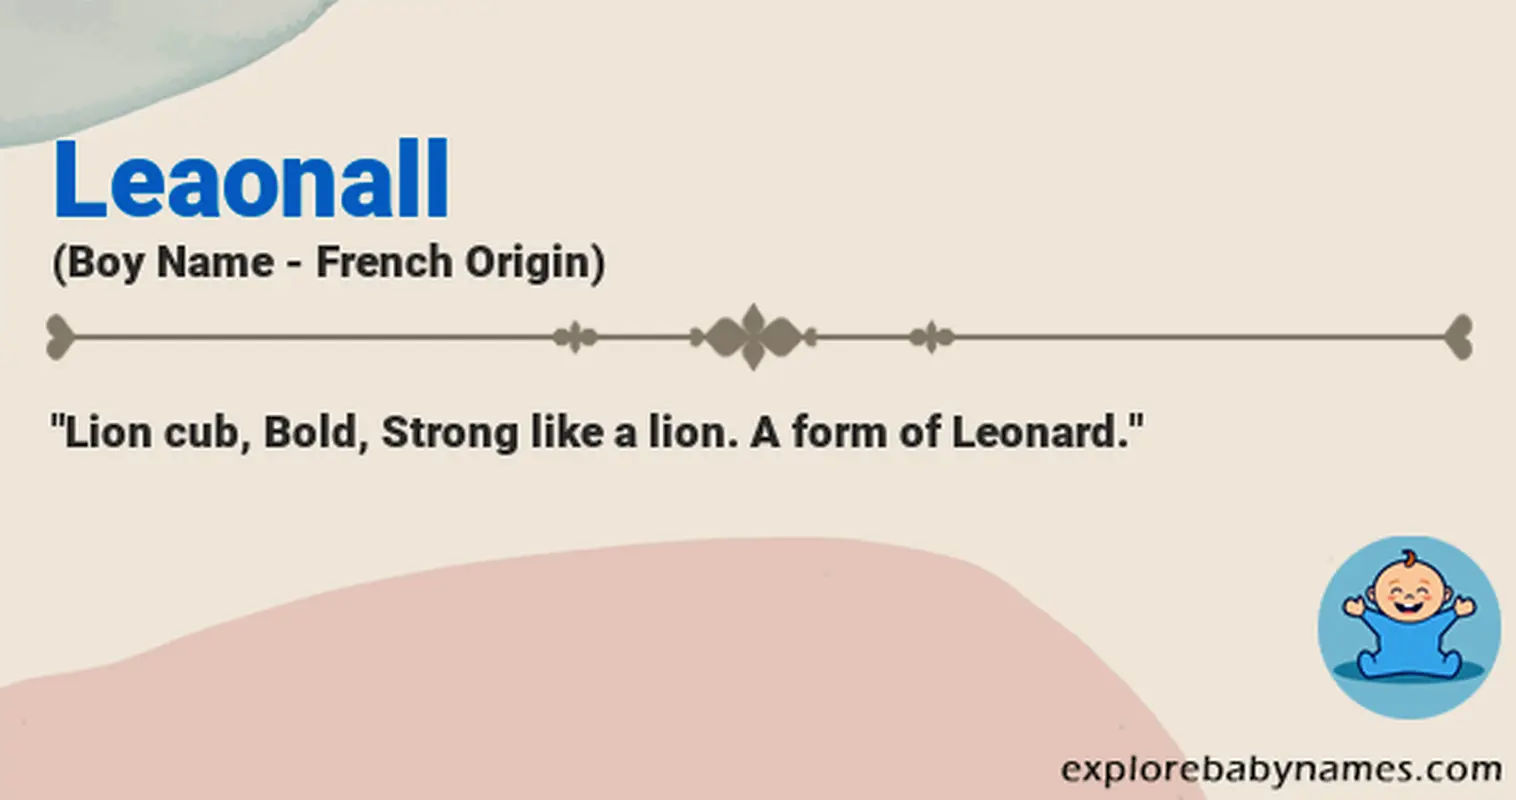 Meaning of Leaonall